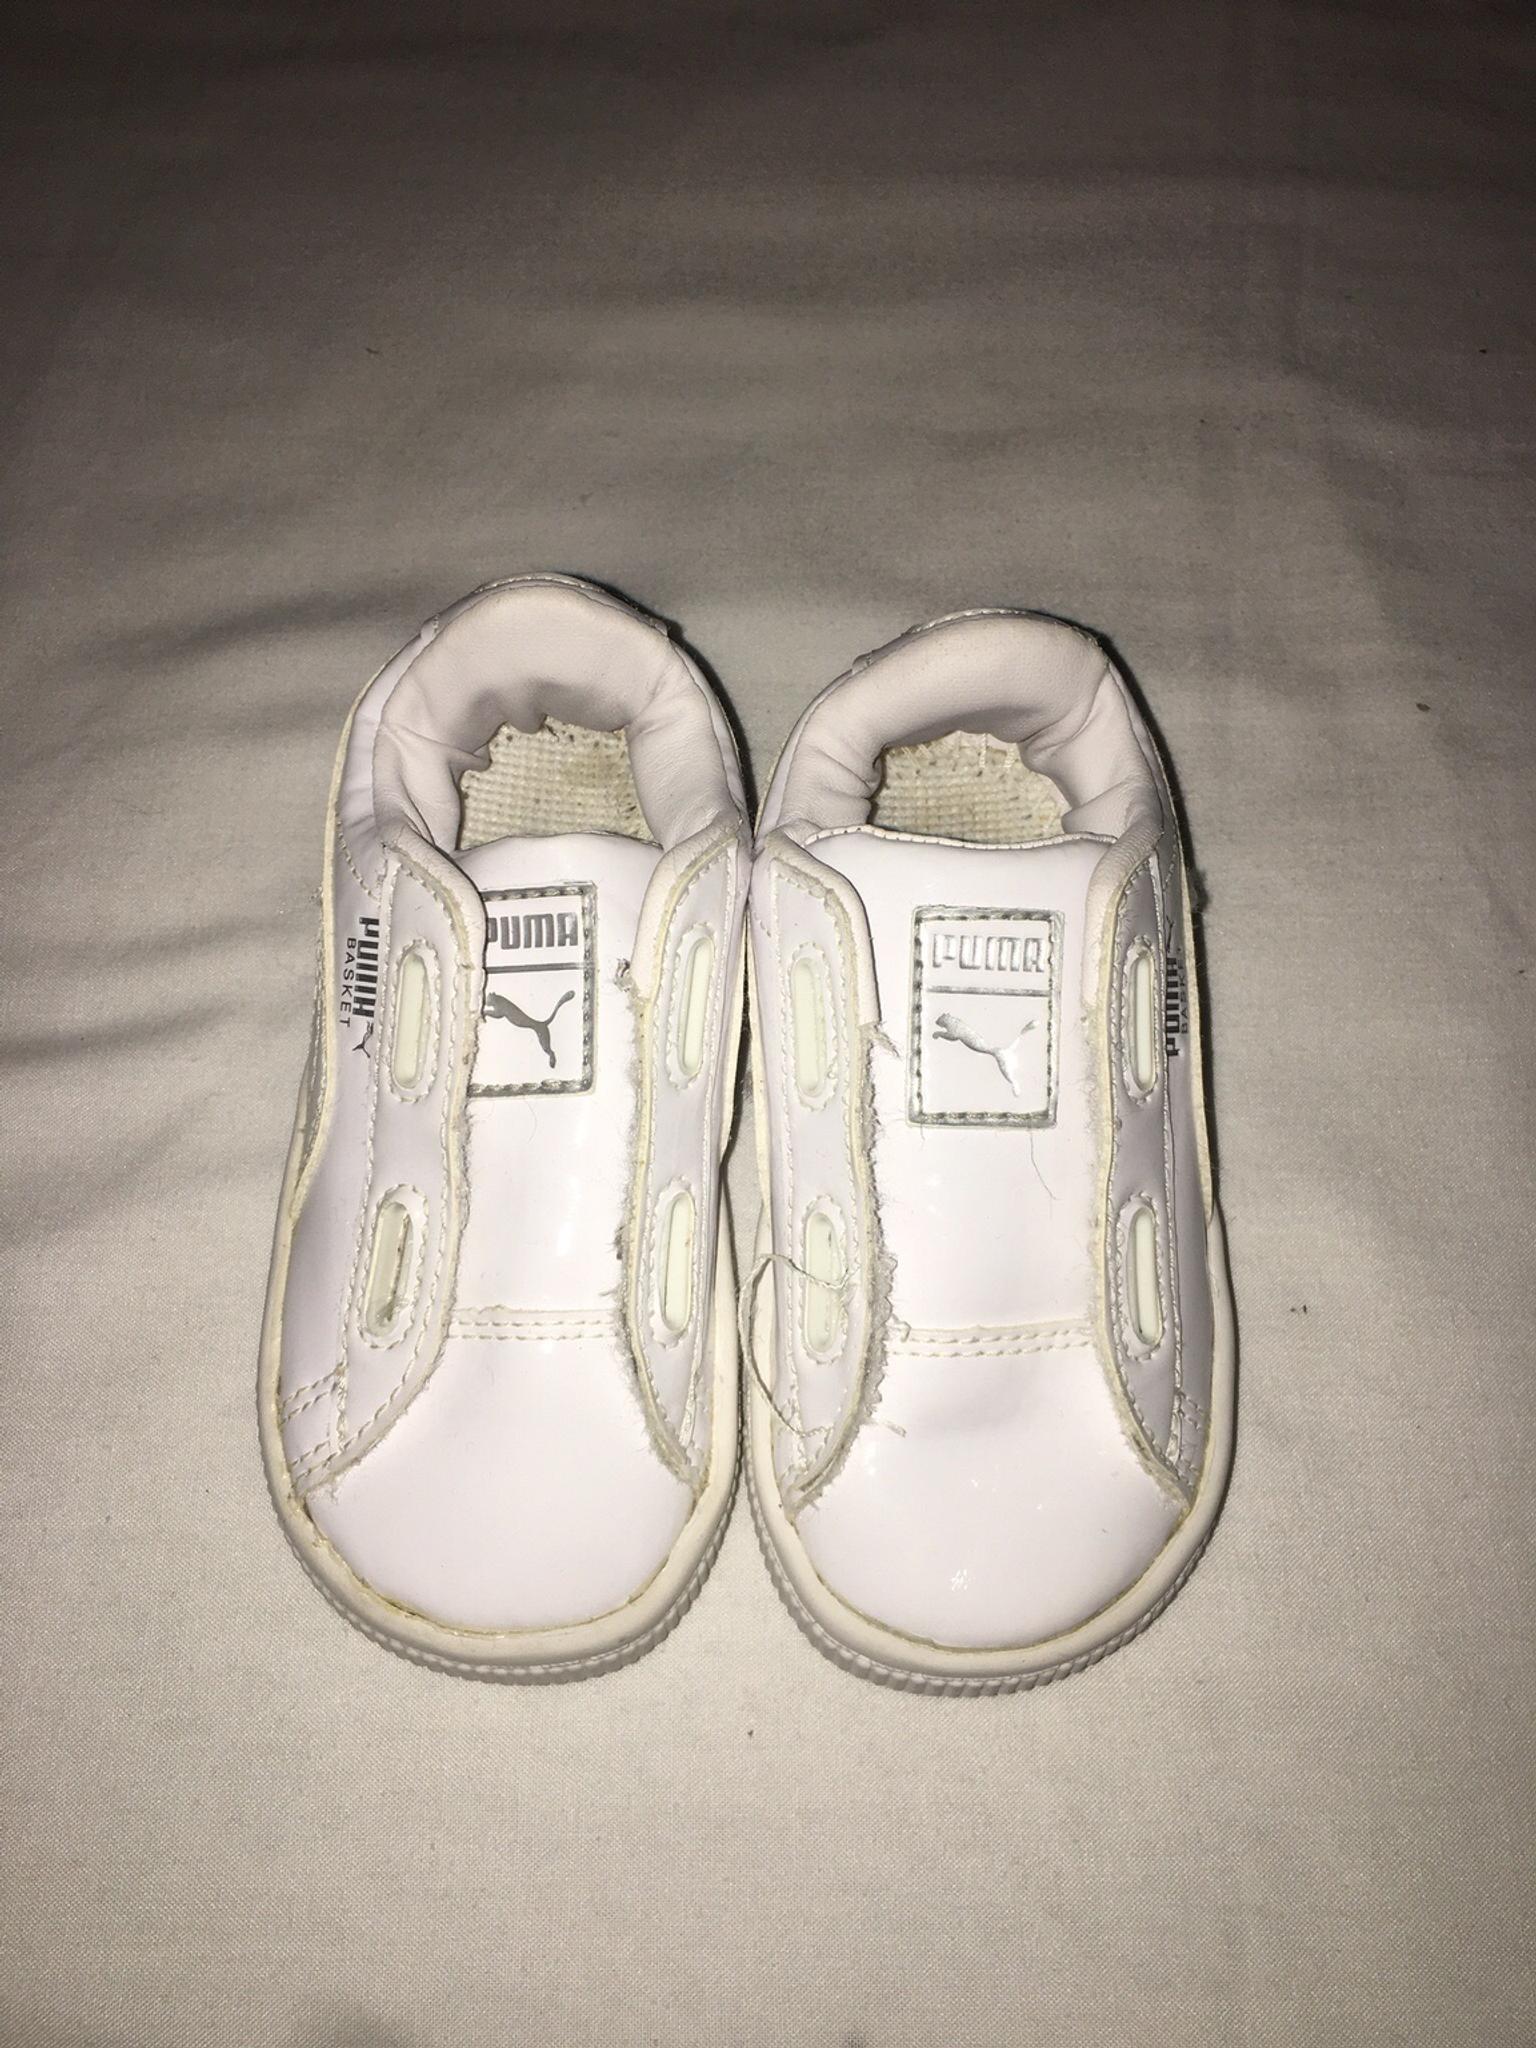 jd sports toddlers trainers